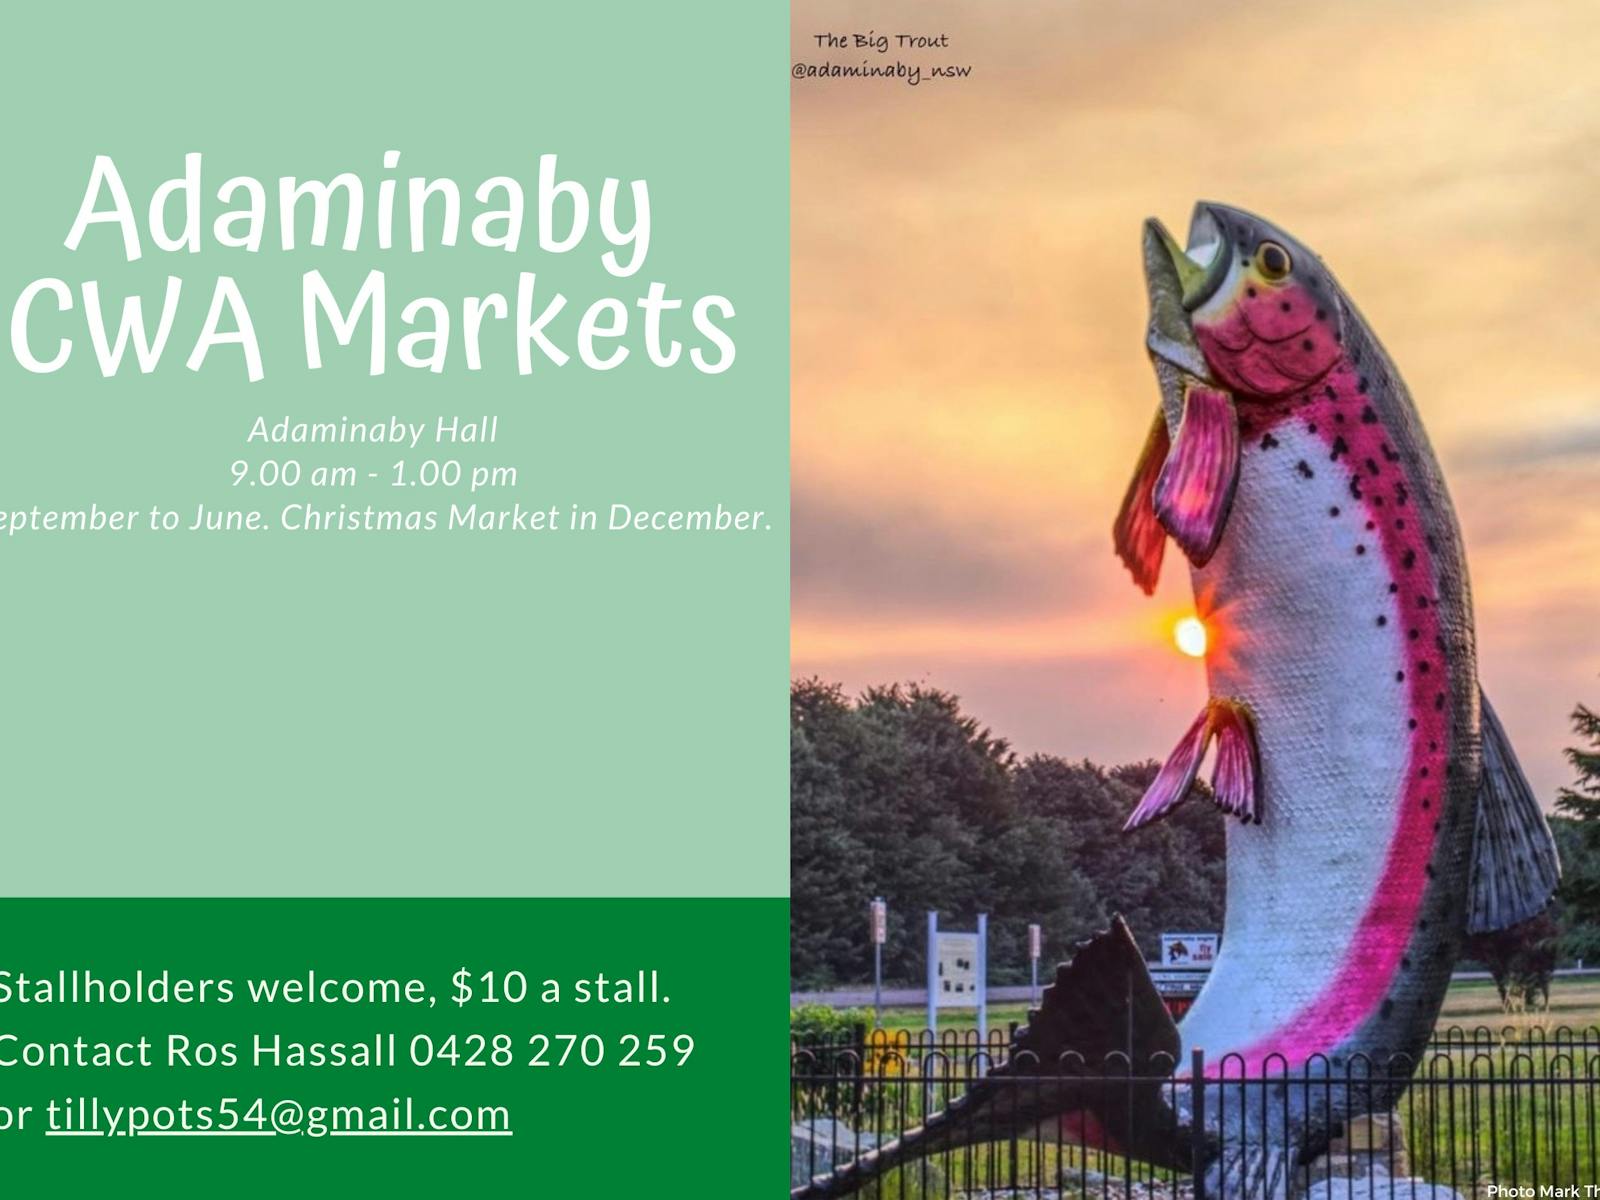 Image for CWA Adaminaby Markets